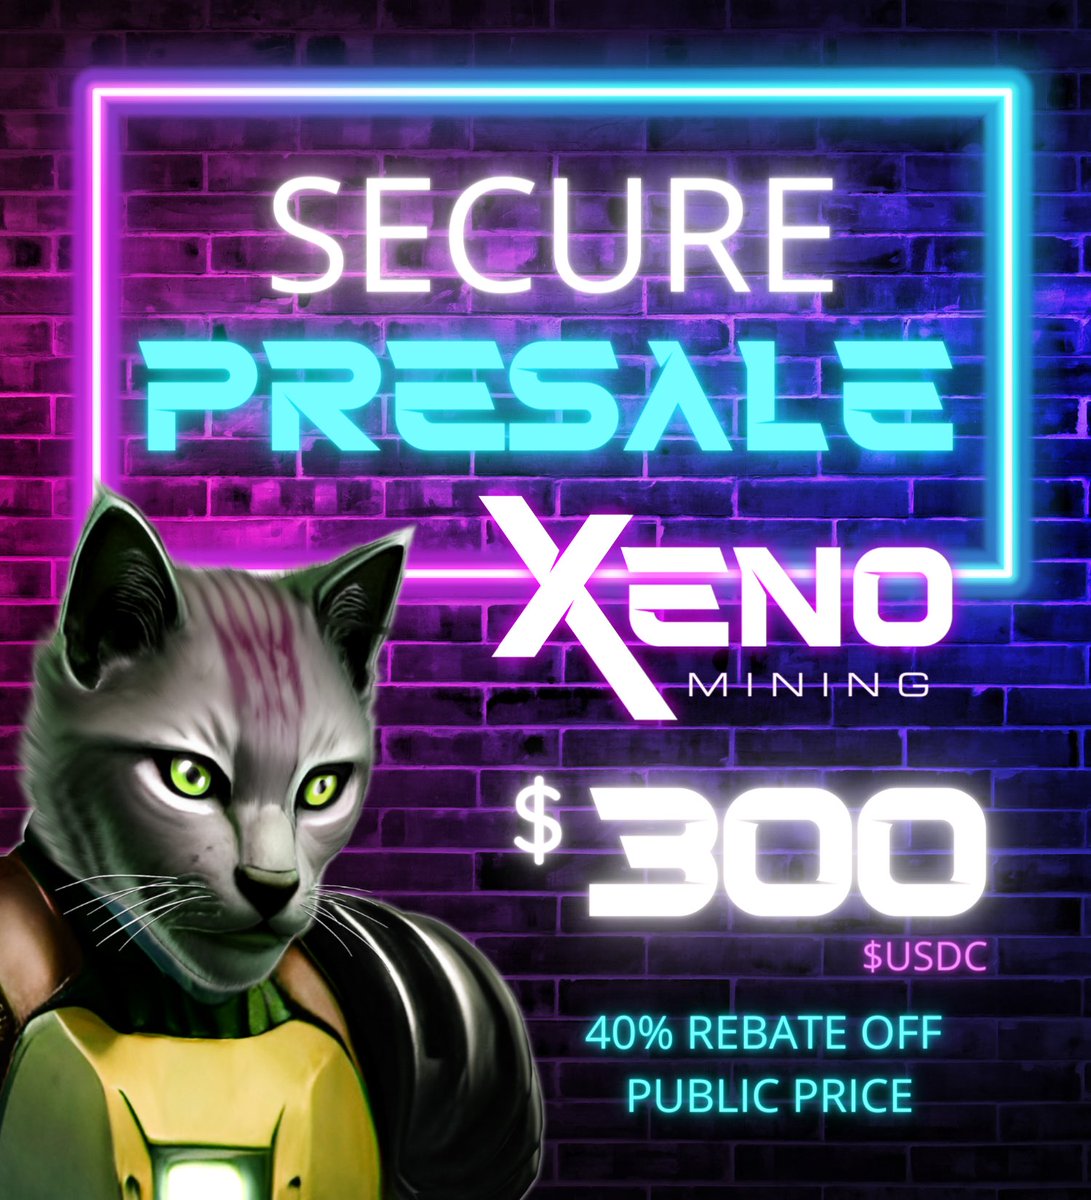 Not only is this a great deal, but paired with an OG from our 1st collection puts you into a pool that earns add’l 5%.

777 OG’s 150-175 holders - you do the math - on top of the 40% paid to Xeno NFT holders #NFT #CryptoMining #profits #WealthCreators